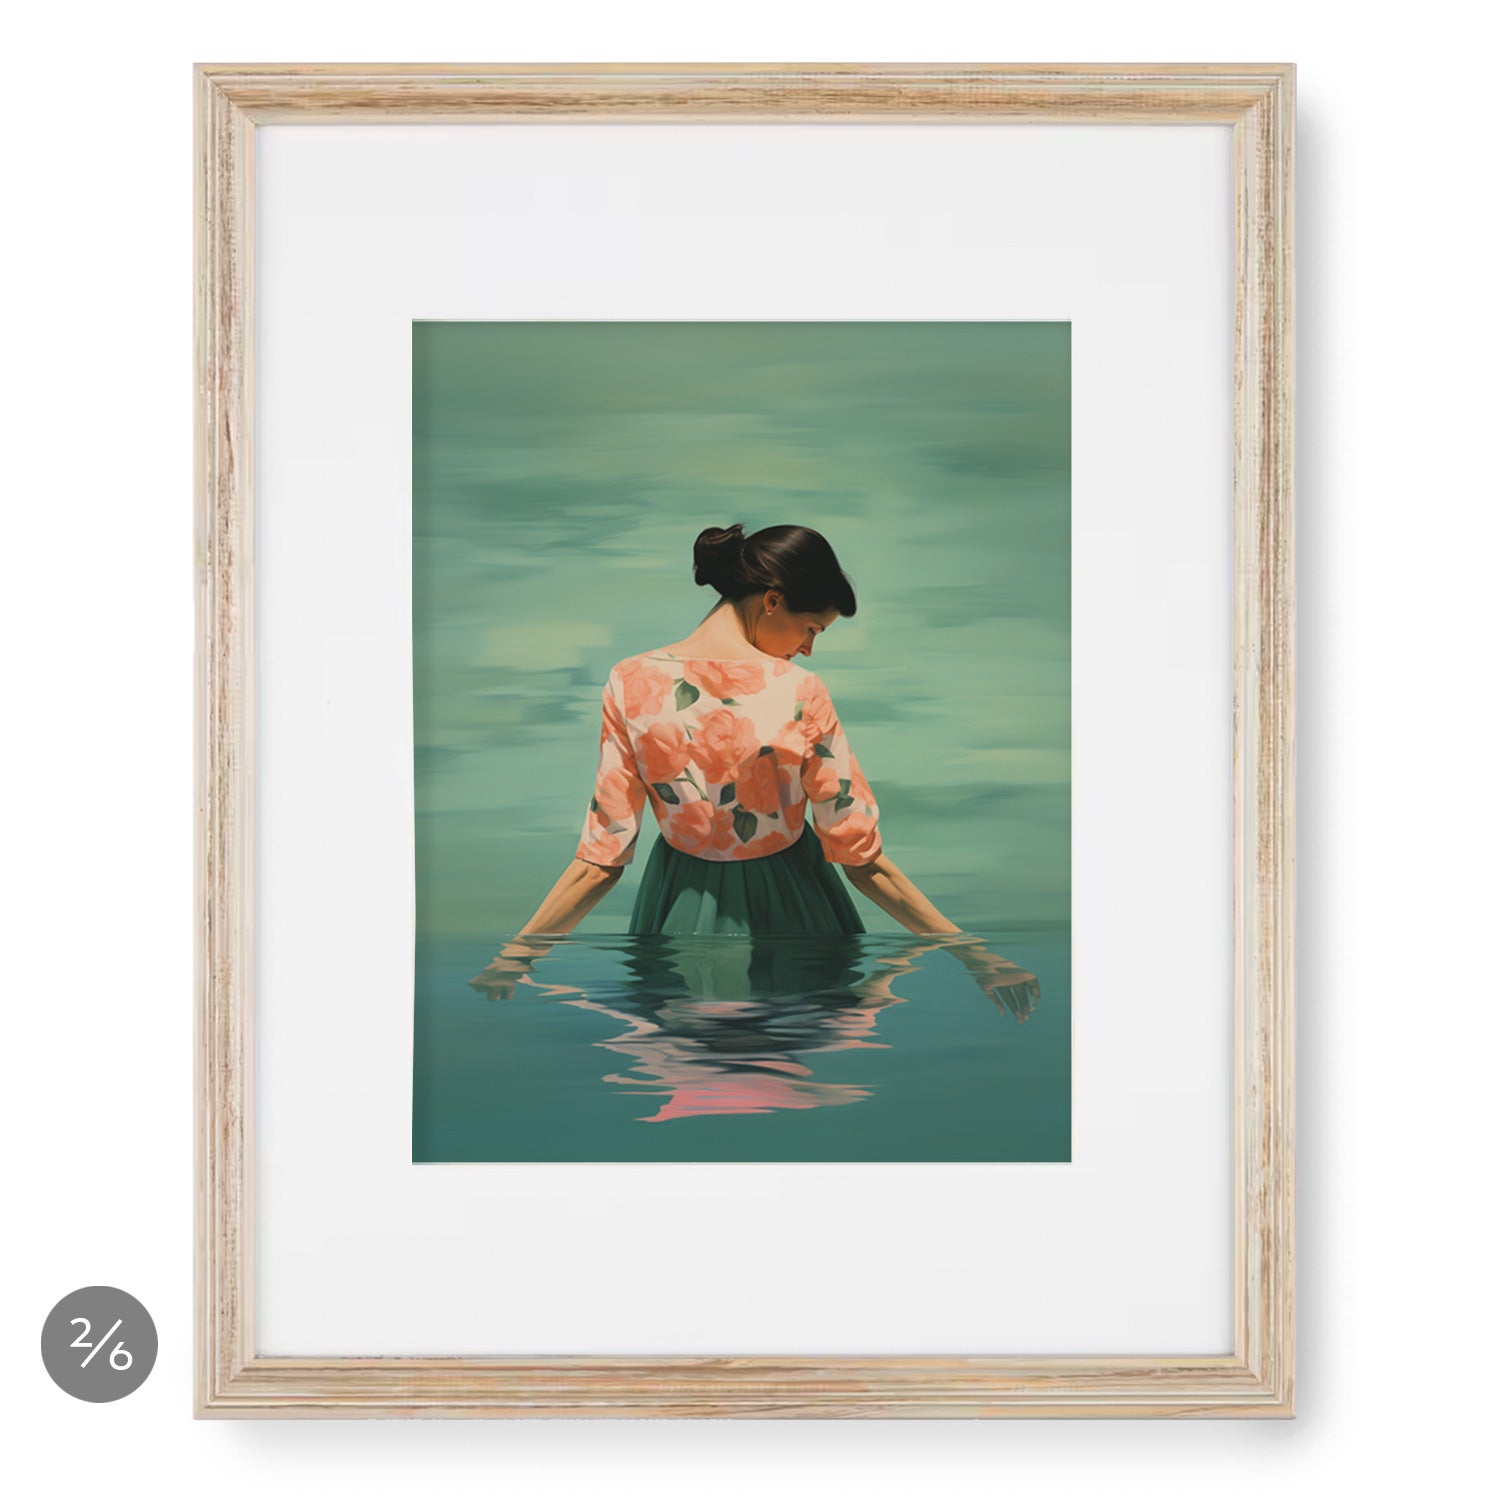 A framed print of a woman standing in the water, perfect for art enthusiasts looking to add the Gallery Wall | Sweet Tart | 6 Piece Set by Stannie & Lloyd to their gallery wall.